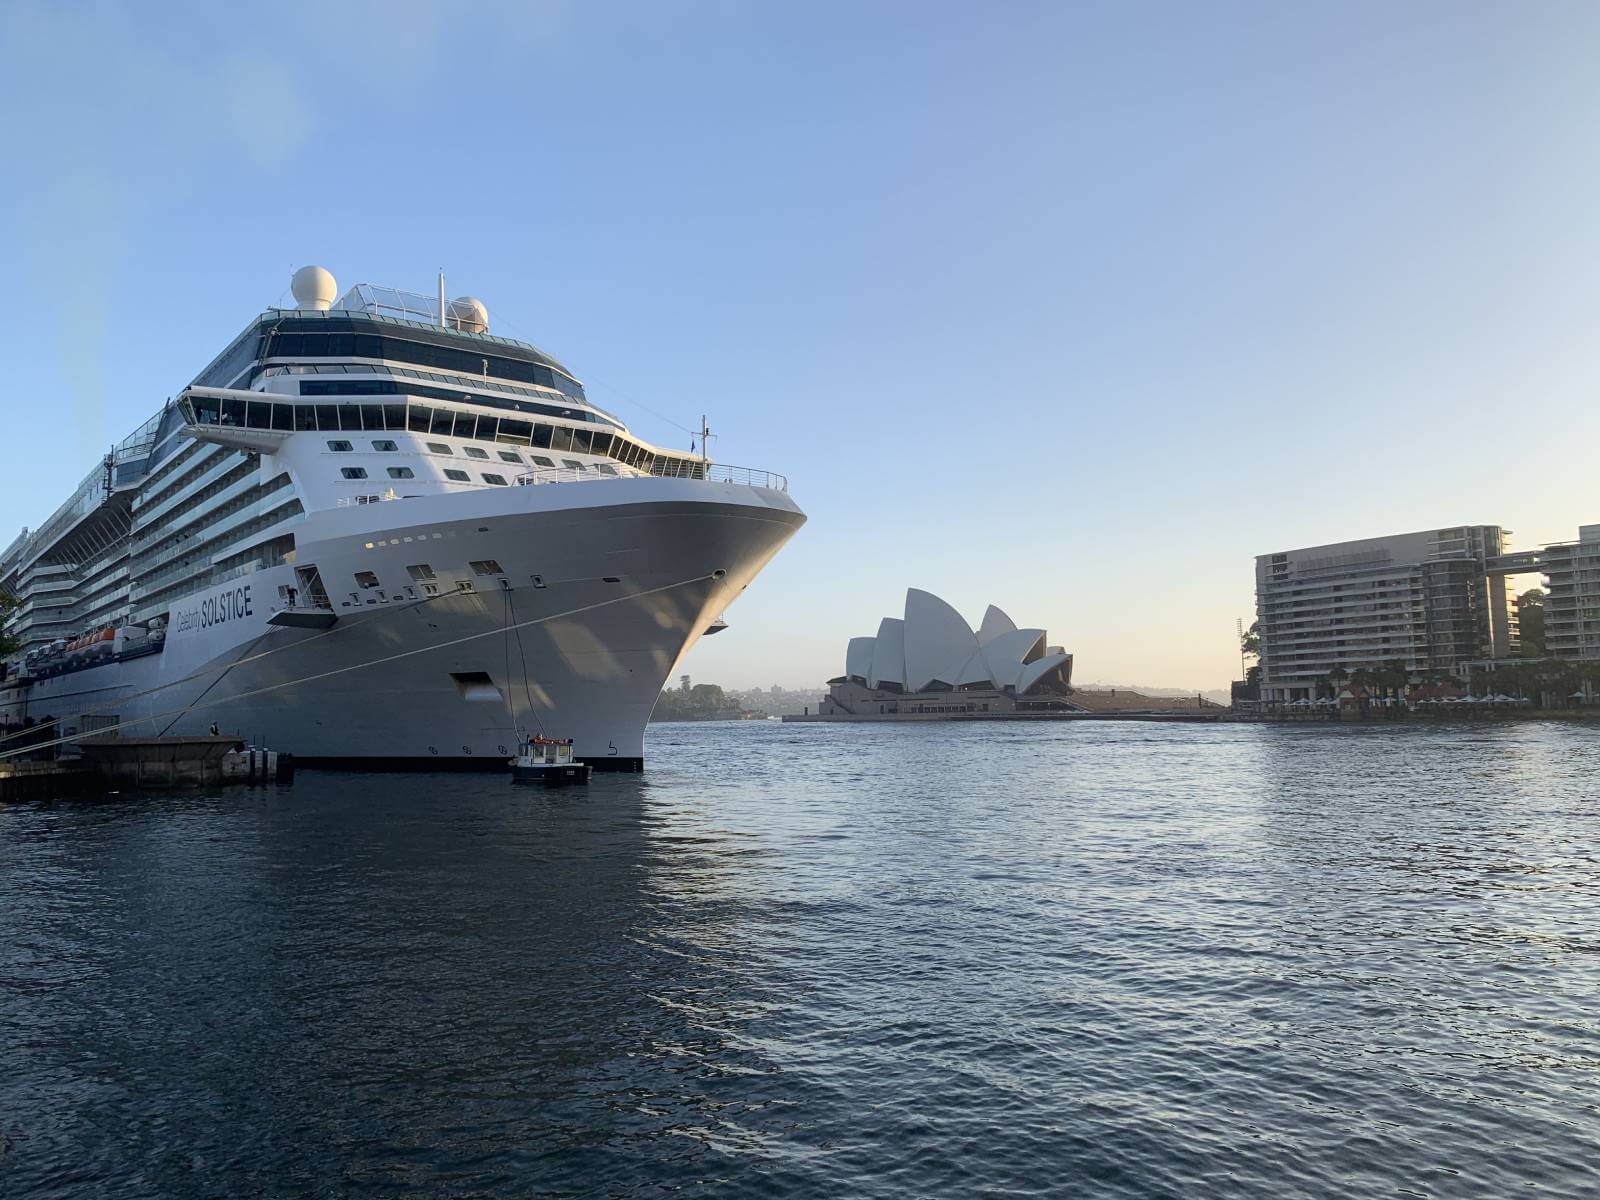 cruise ship docked in port with sydney opera house in the background